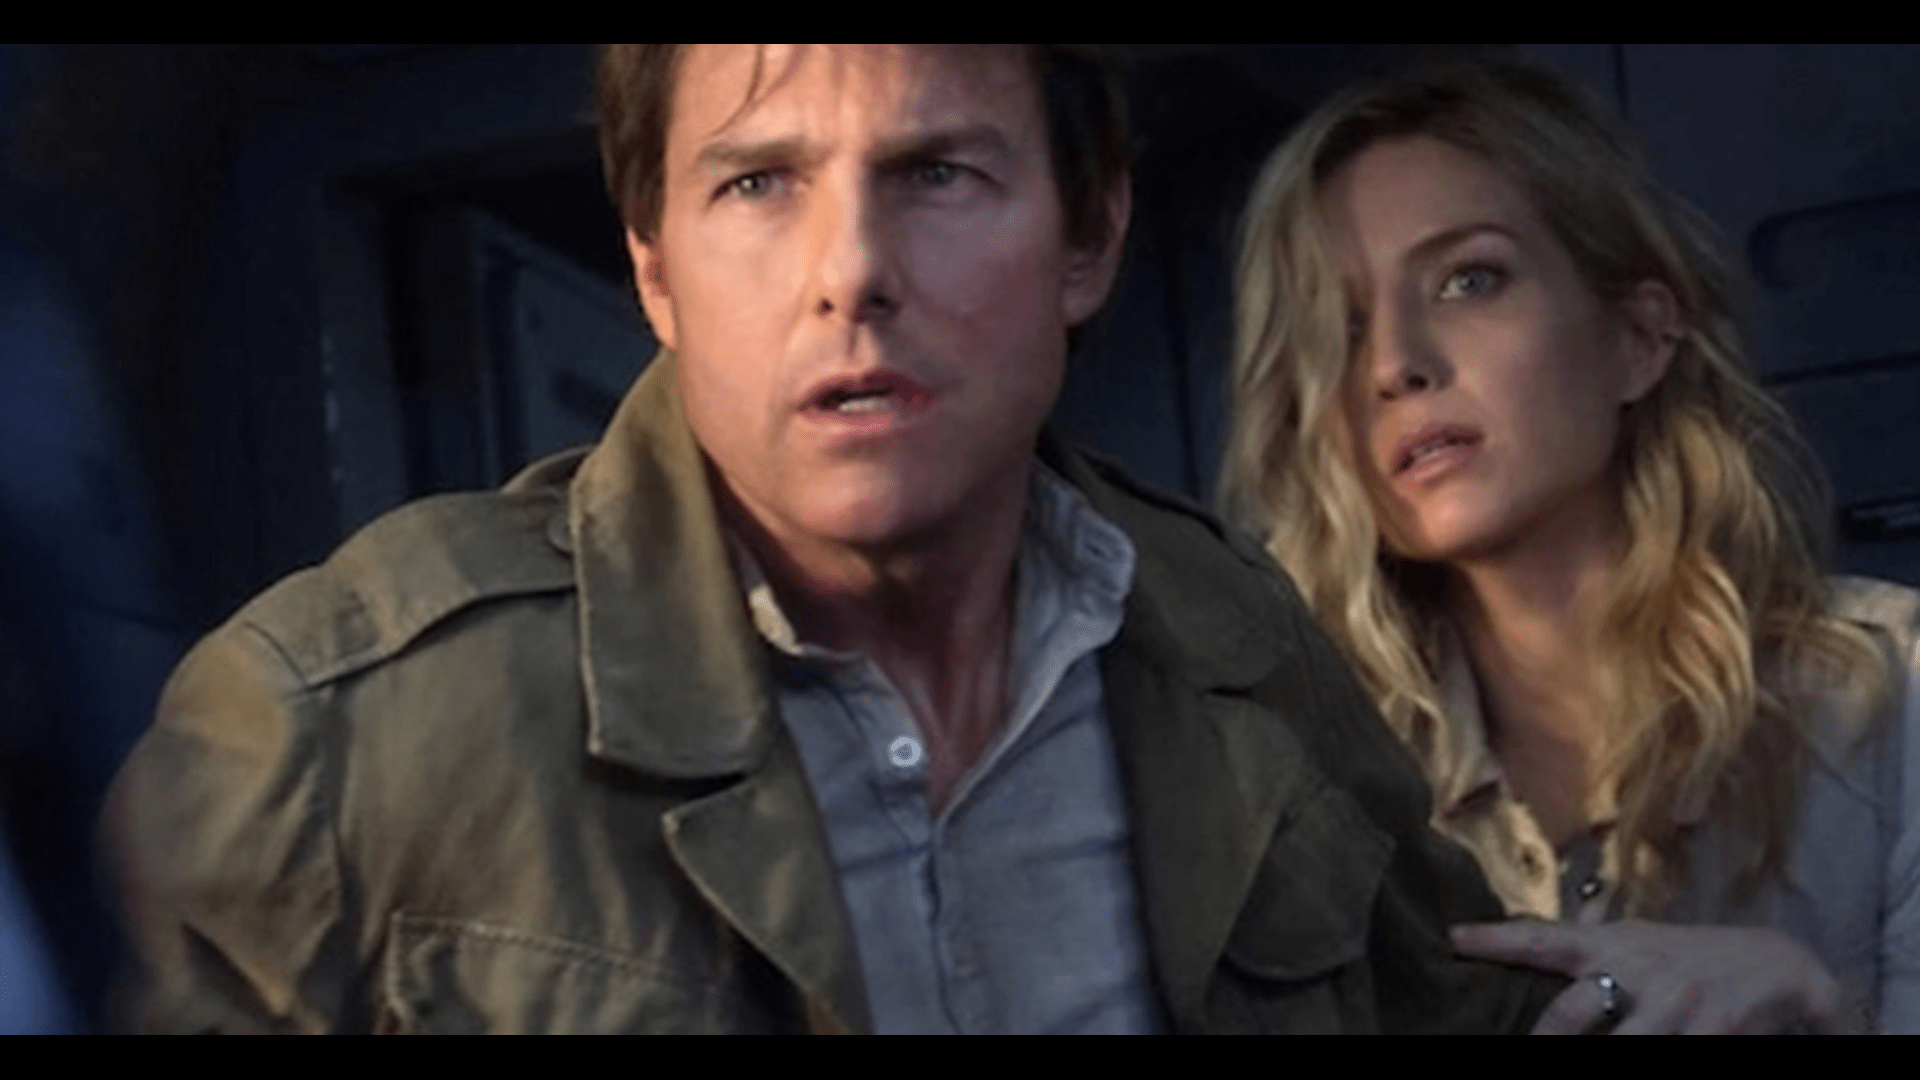 'The Mummy' is the most significant loss in the life of Alex Kurtzman